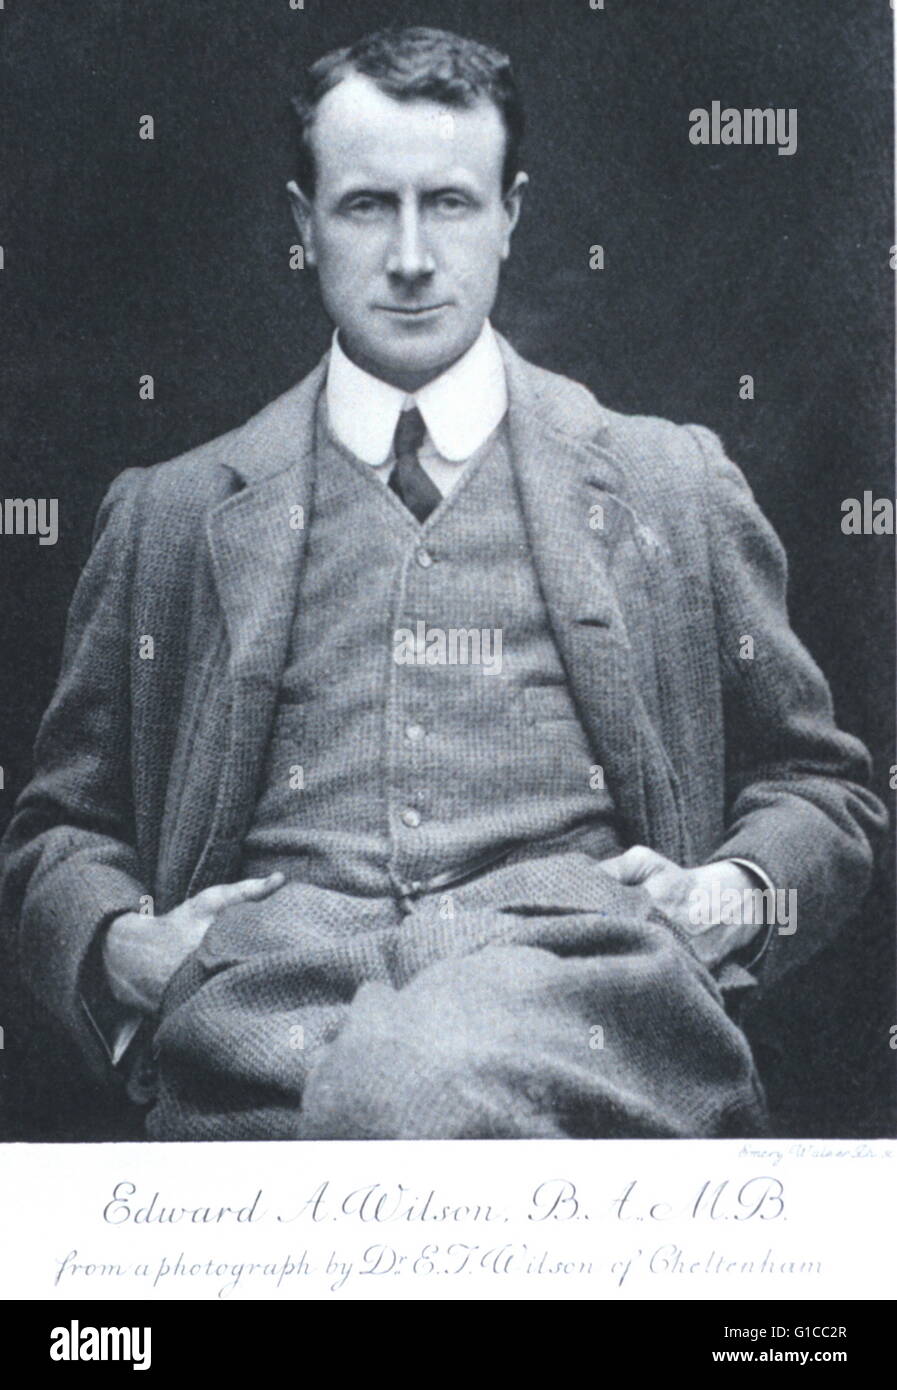 Photographic portrait of Edward Adrian Wilson (1872-1912) an English physician, polar explorer, natural historian, painter and ornithologist. Dated 20th Century Stock Photo